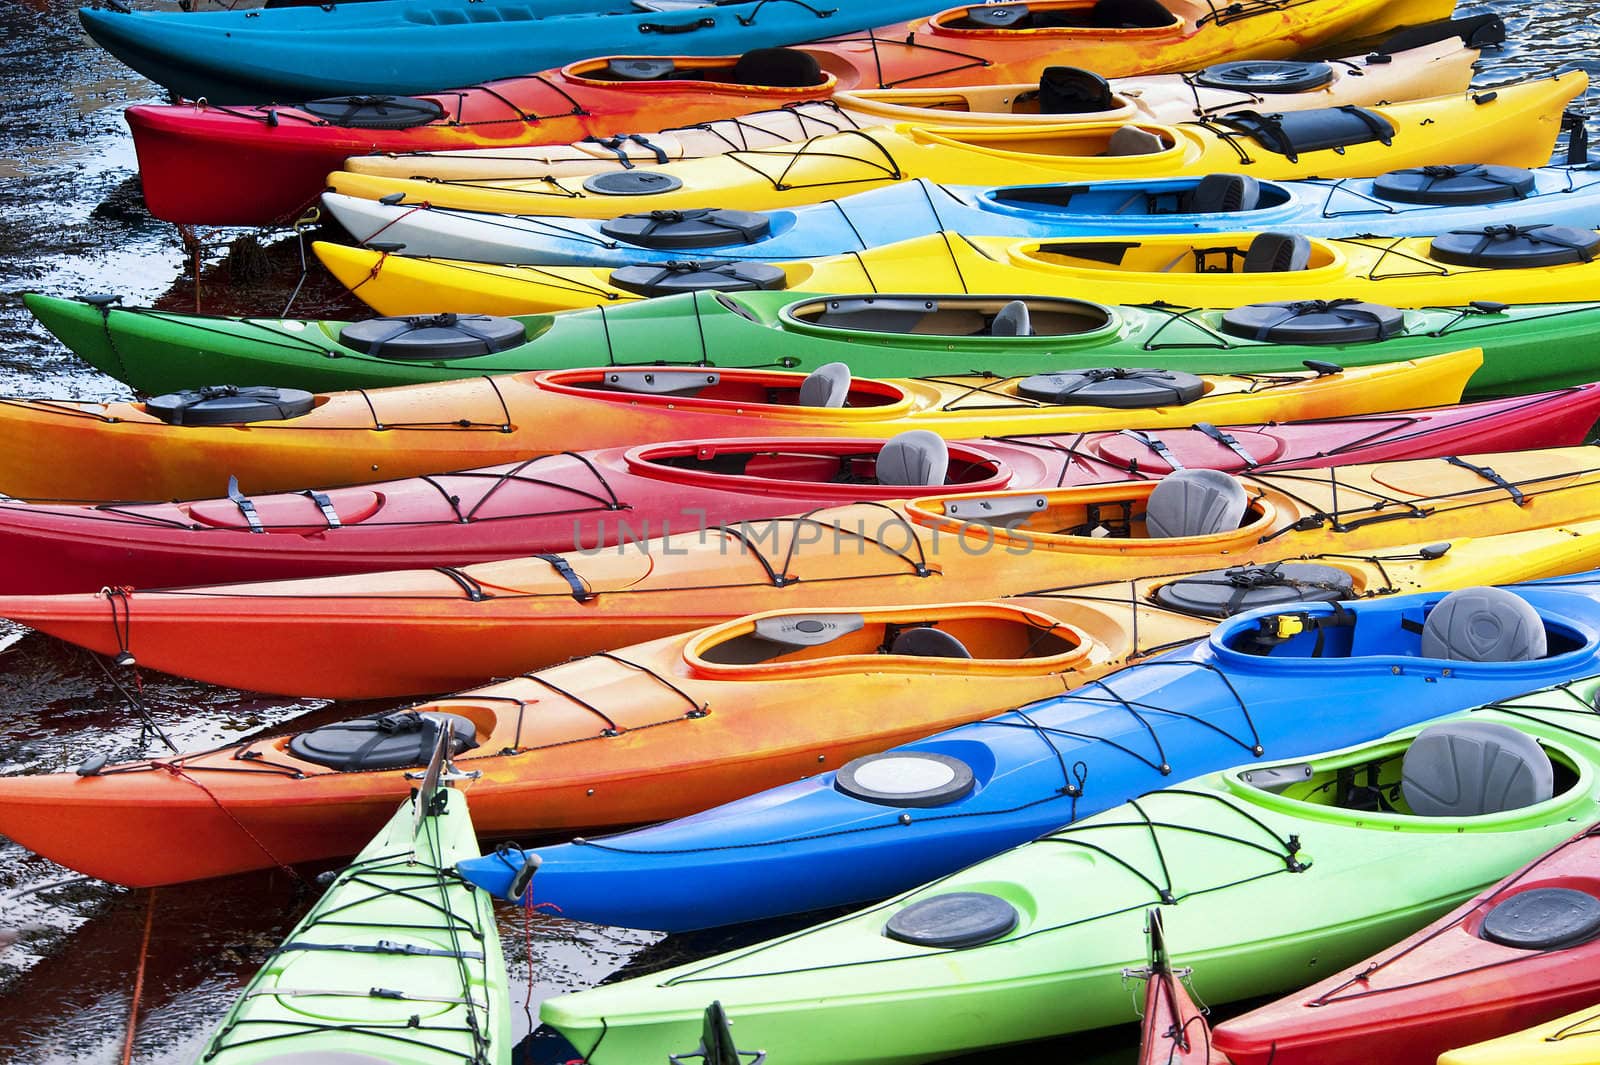 Colorful fiberglass kayaks tethered to a dock as seen from above